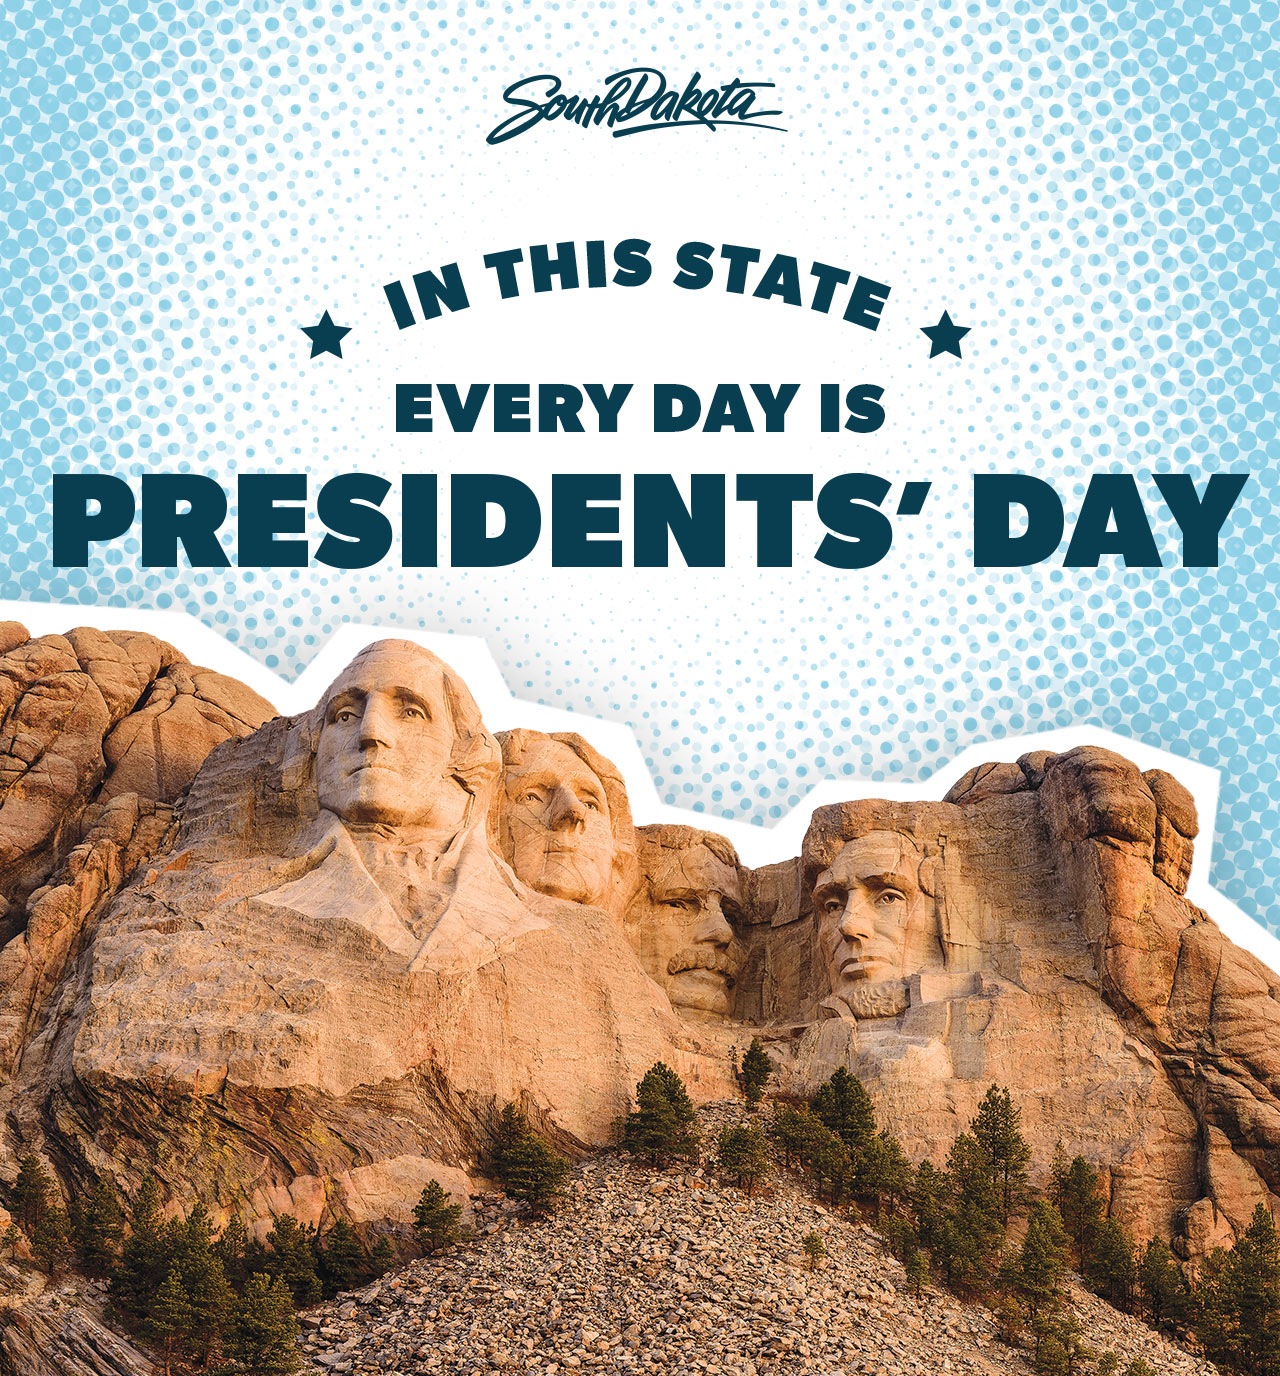 South Dakota - In This State Ever Day is President's Day